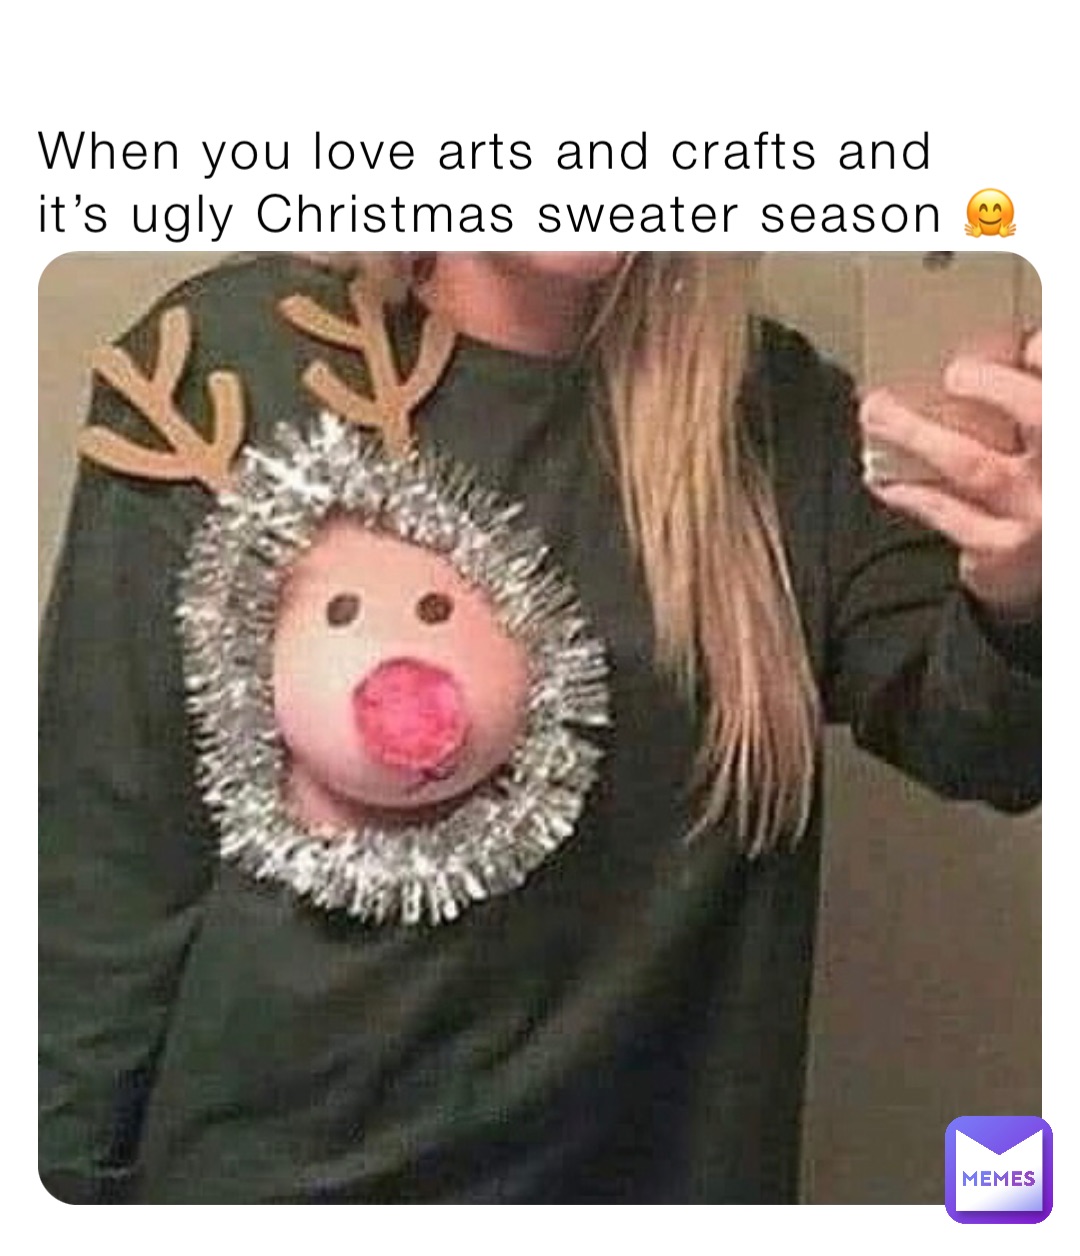 When you love arts and crafts and it’s ugly Christmas sweater season 🤗